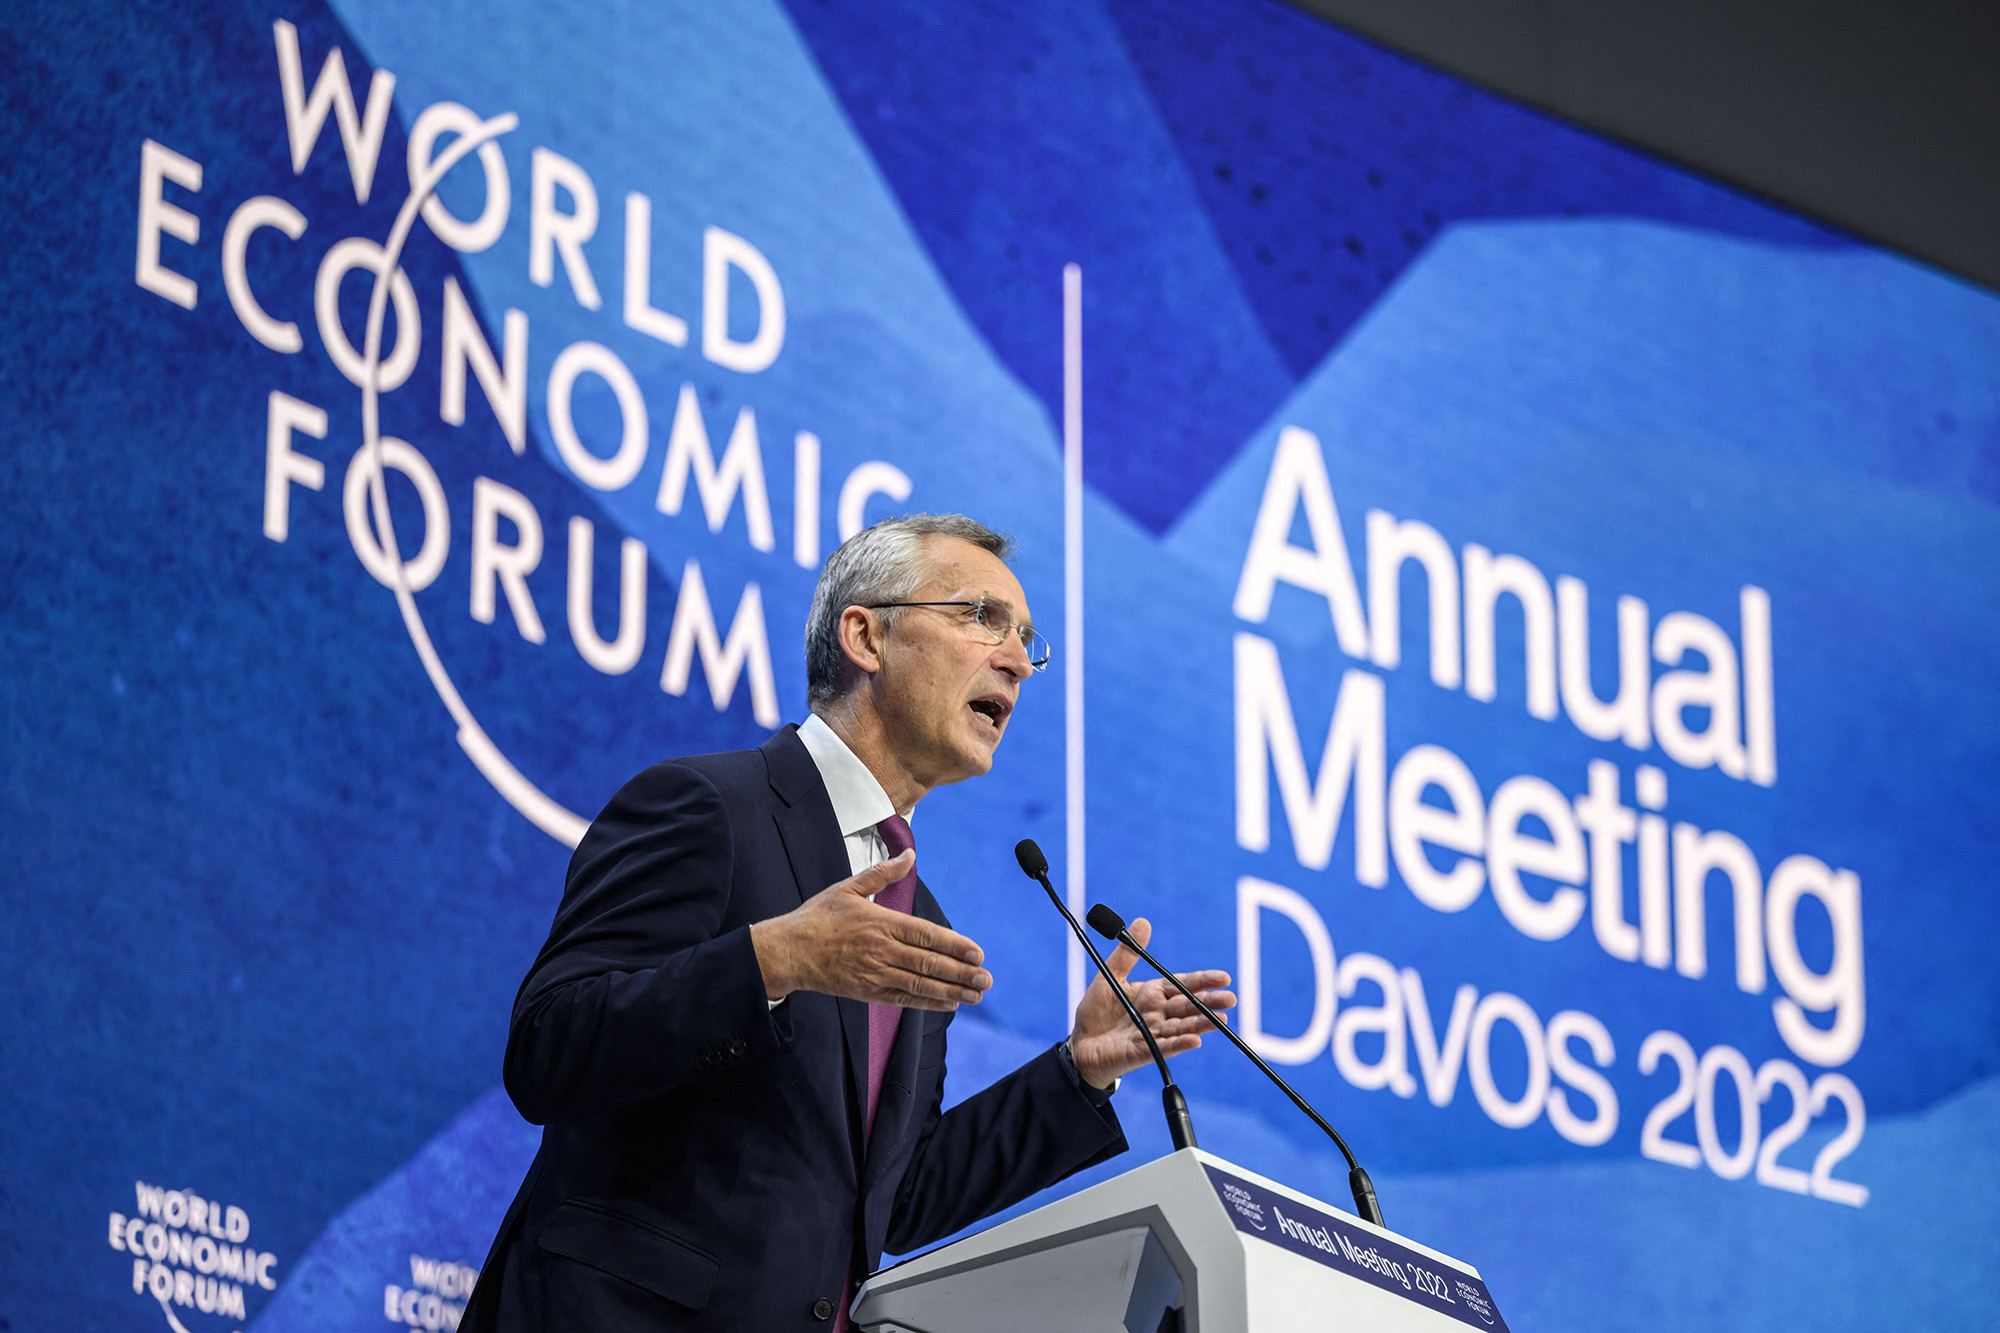 NATO secretary general Jens Stoltenberg addresses the assembly during the World Economic Forum (WEF) annual meeting in Davos, Switzerland, on May 24.